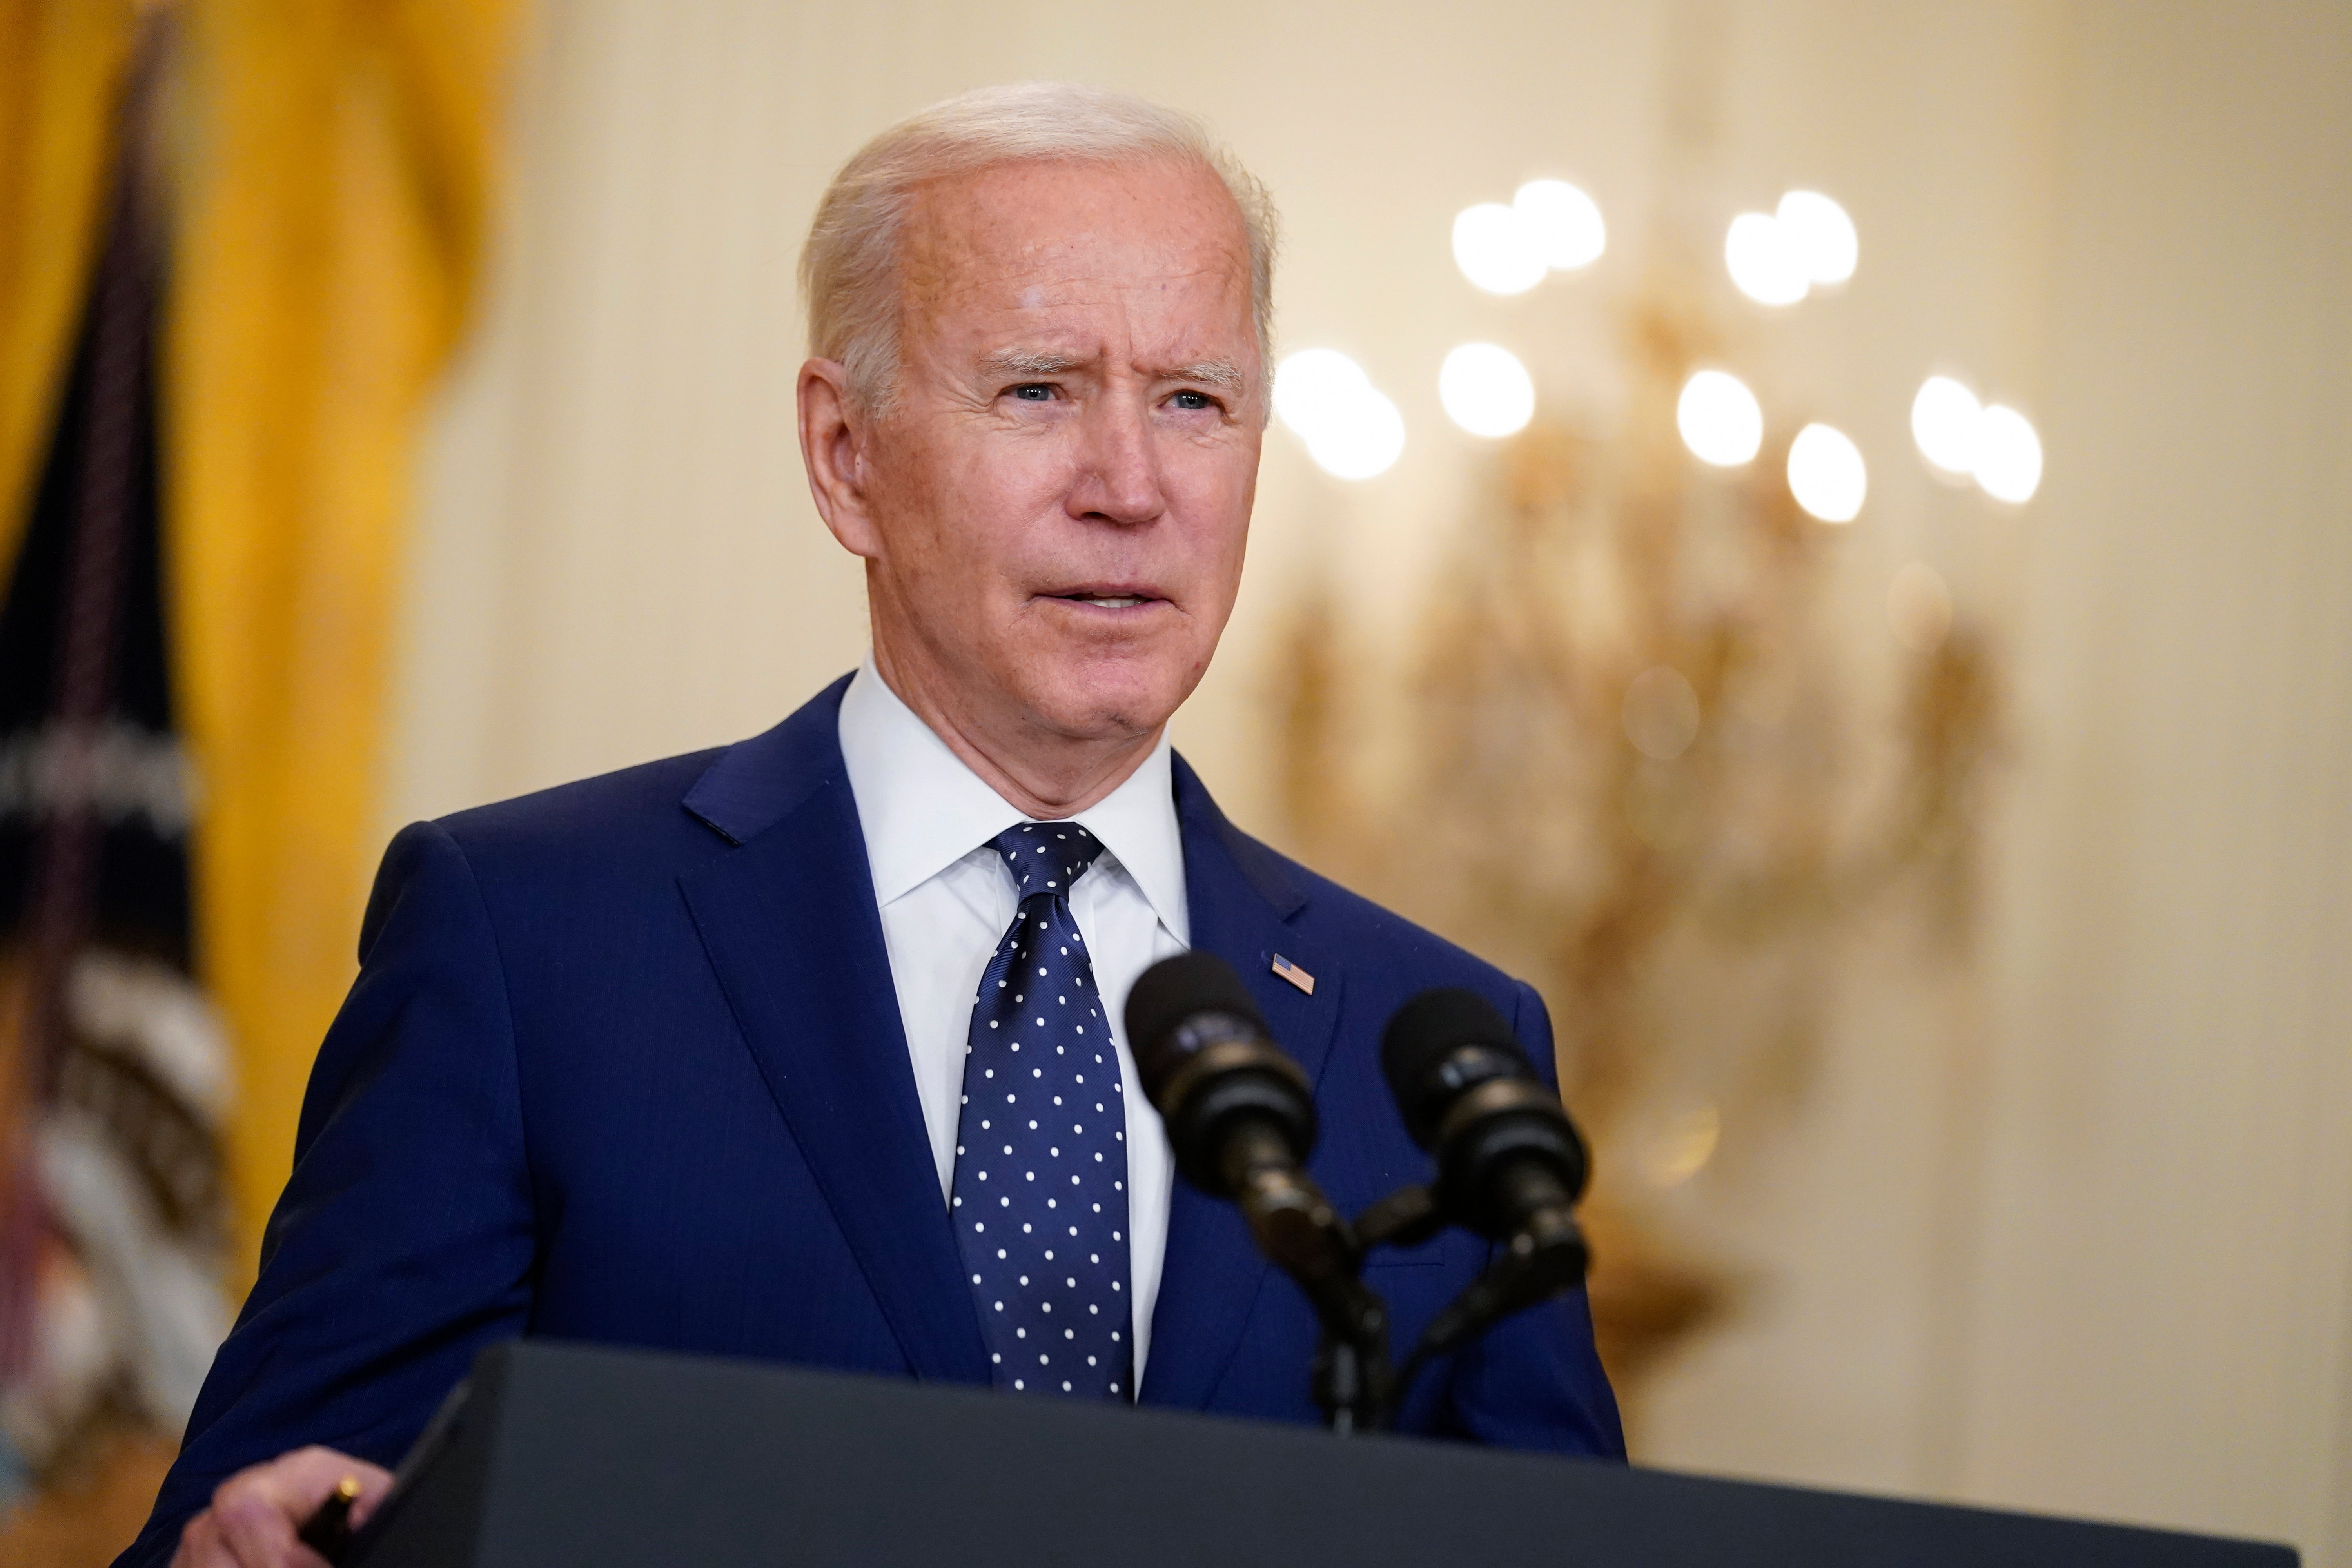 File image: President Biden may refer to the first World War atrocities against Armenians by Ottoman empire as genocide